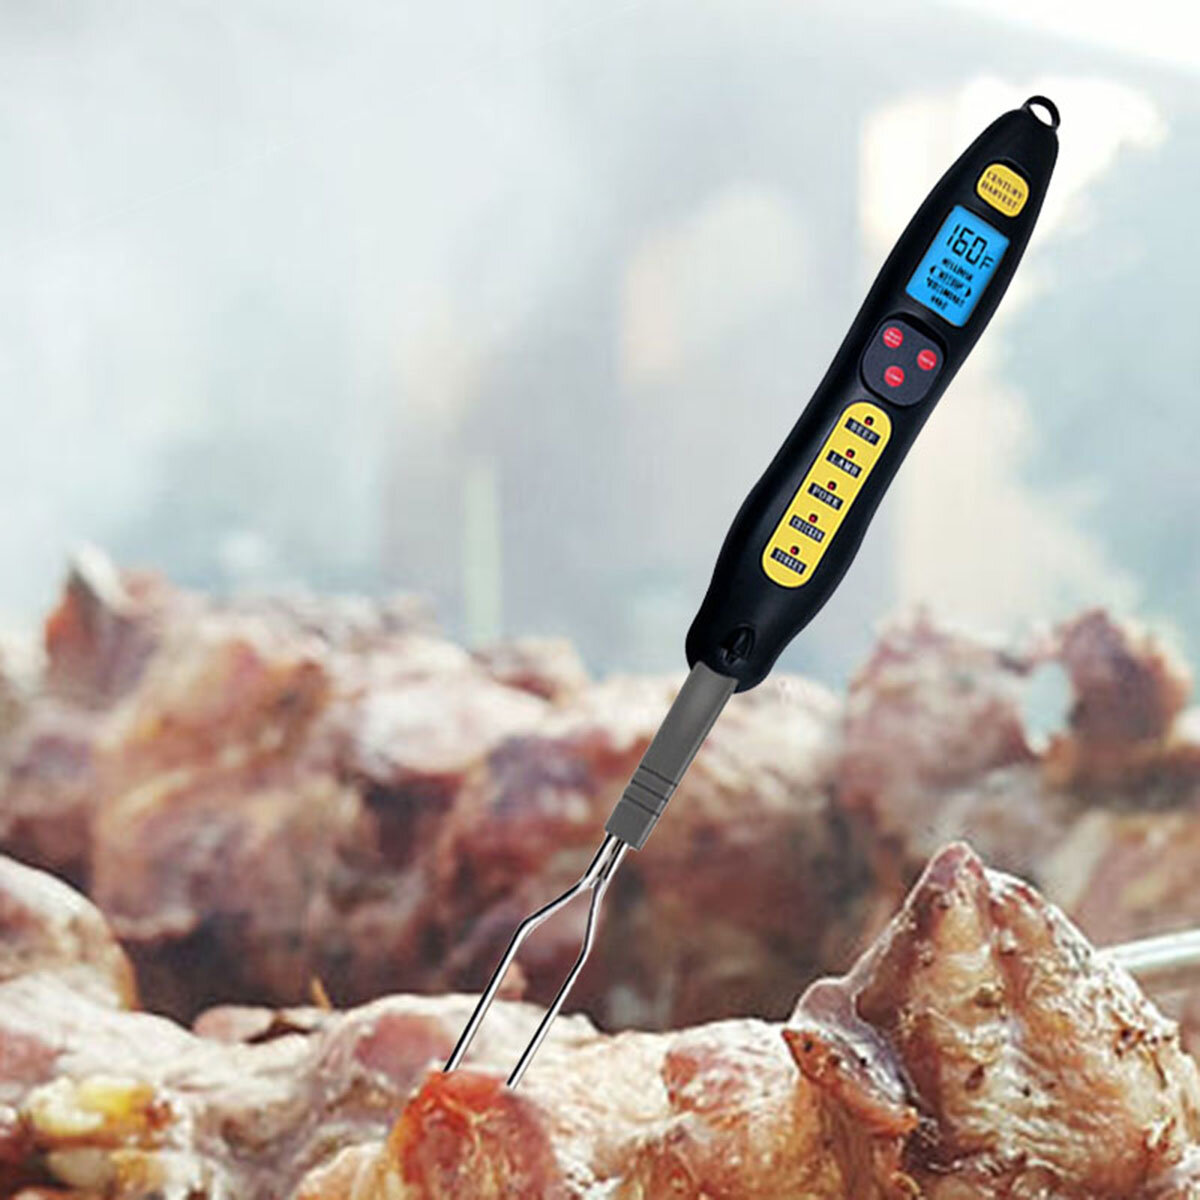 

Loskii KCH-205 Digital Food Thermometer Electric Wireless Meat Thermometer Kitchen Cooking Thermometer BBQ Stainless For